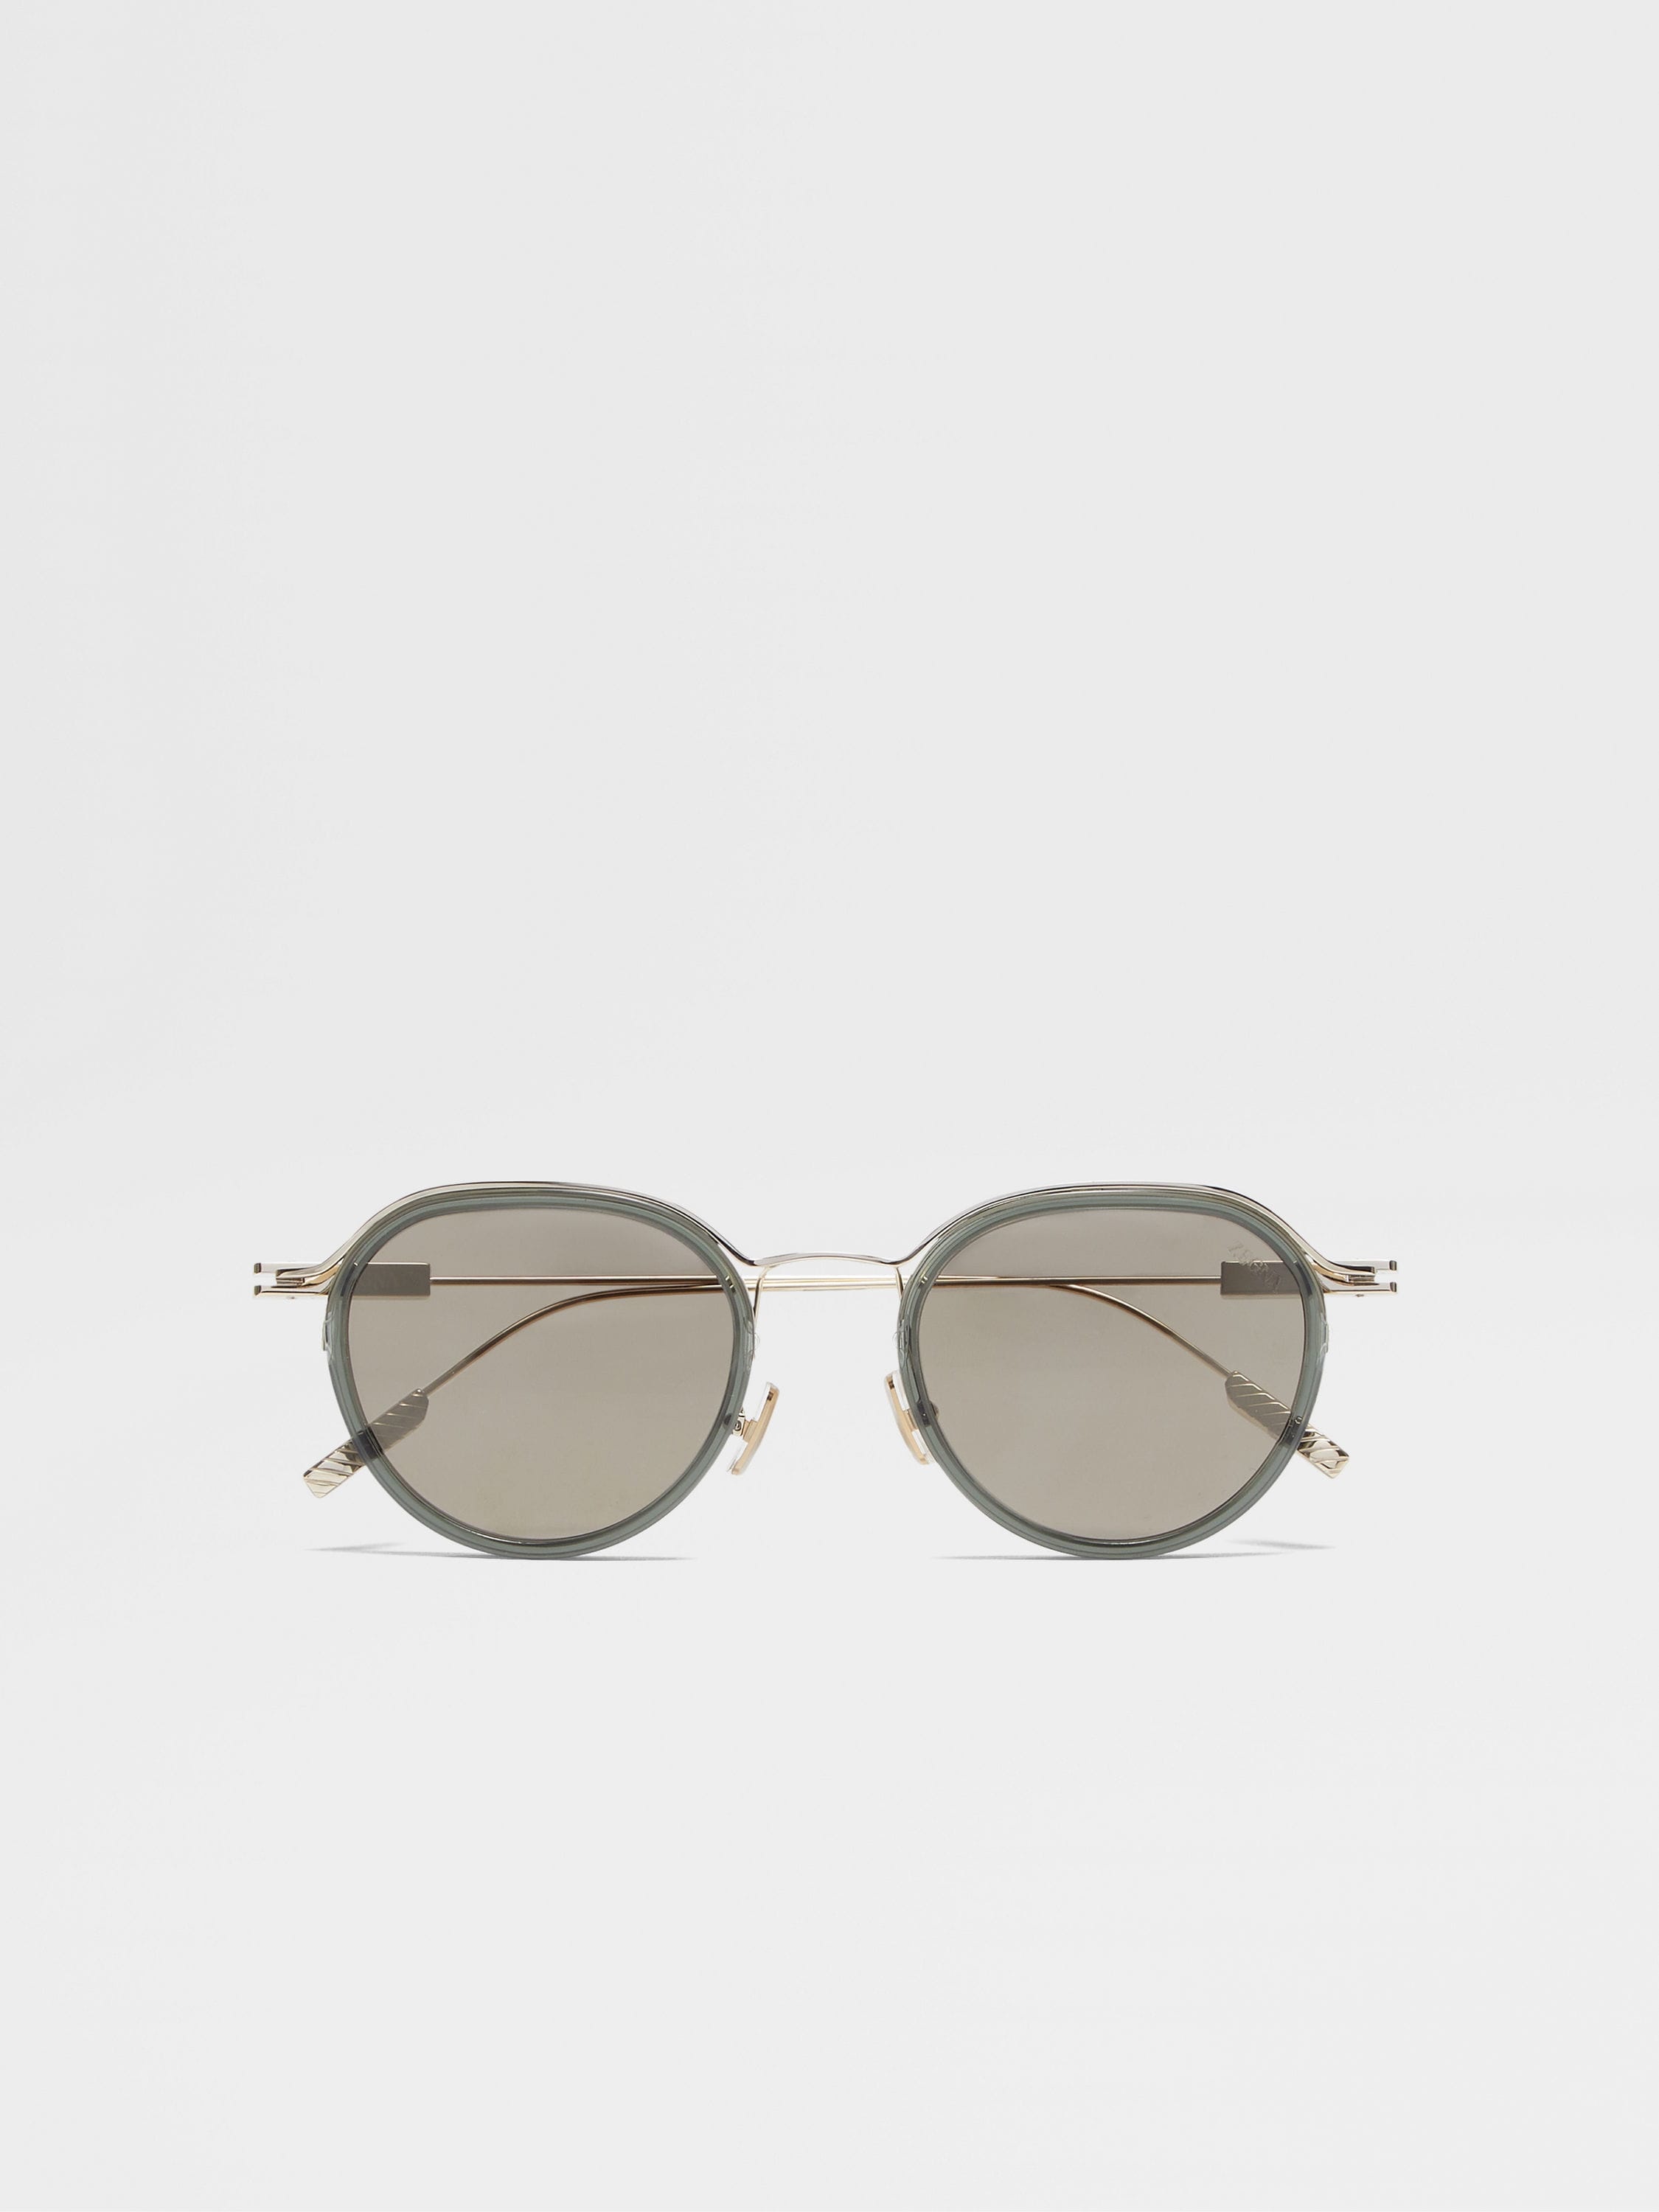 TRANSPARENT GREEN AND PALE GOLD ACETATE AND METAL SUNGLASSES - 1